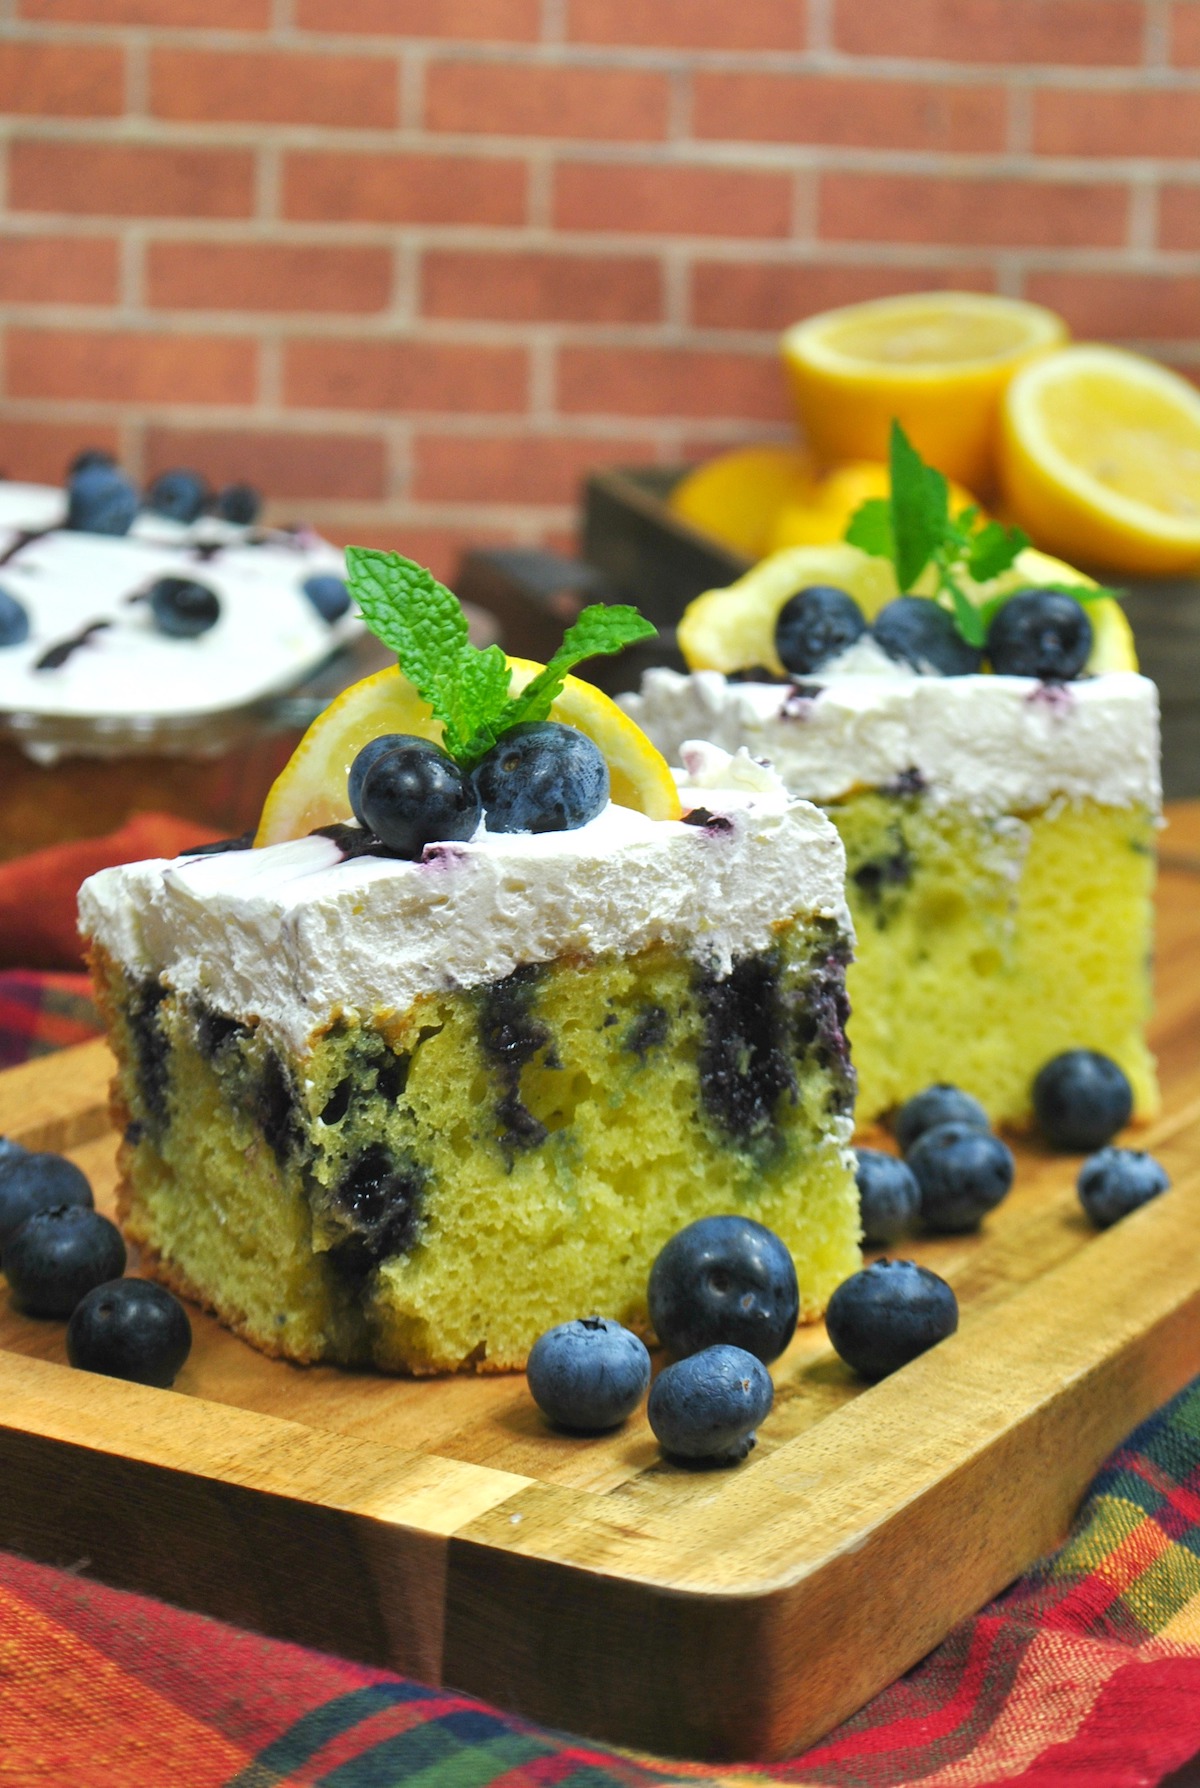 Lemon cake with blueberries and whipped topping.